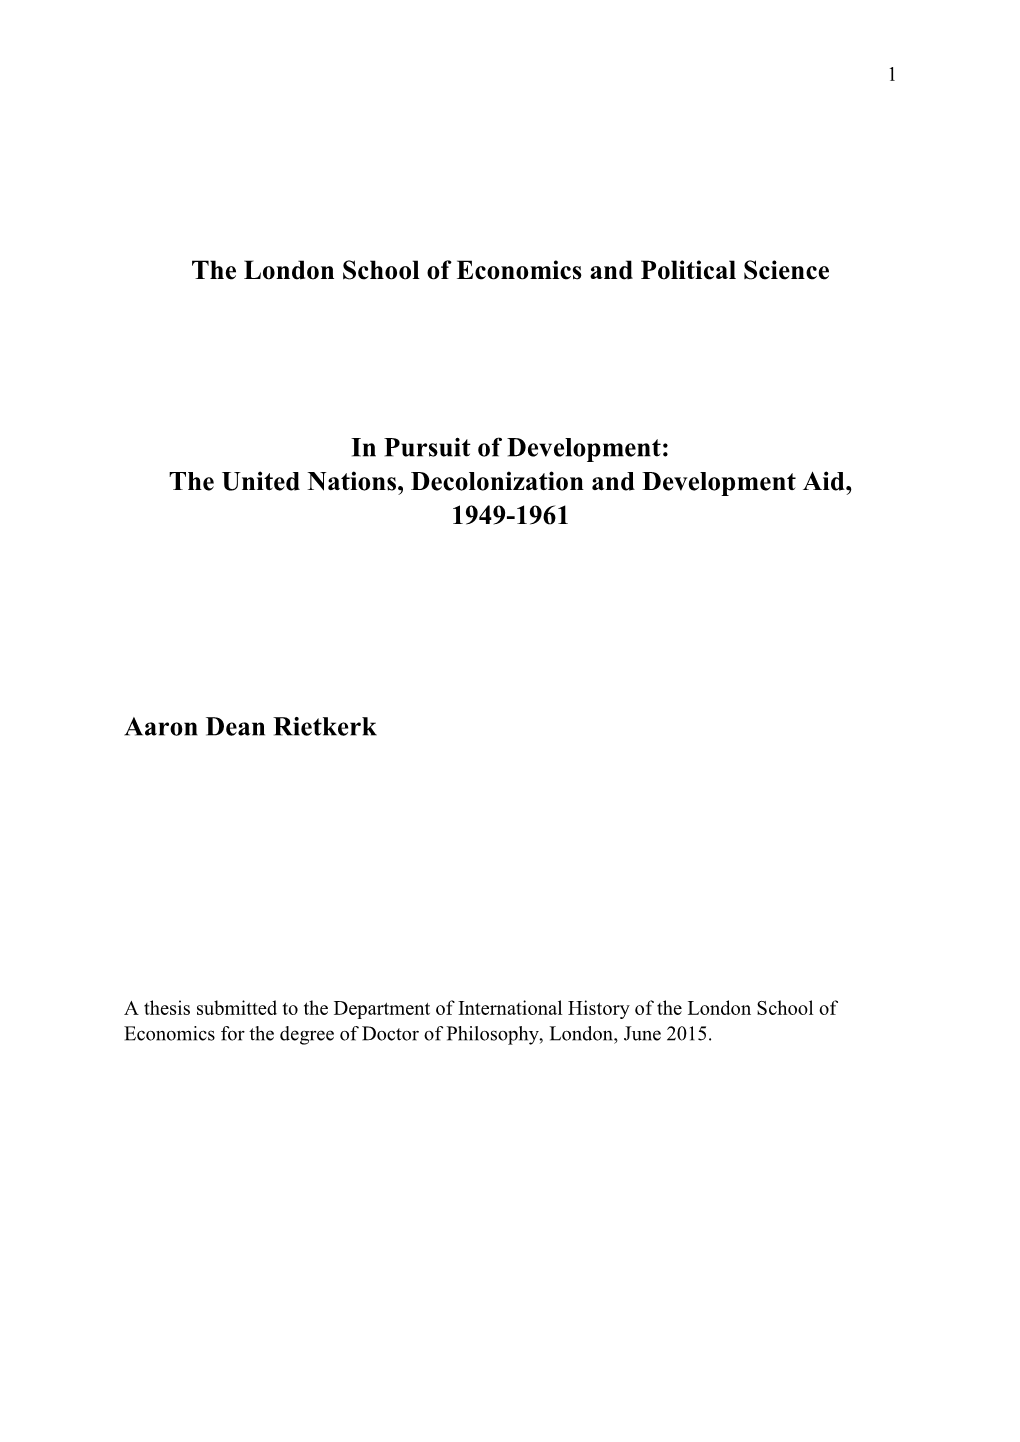 The United Nations, Decolonization and Development Aid, 1949-1961